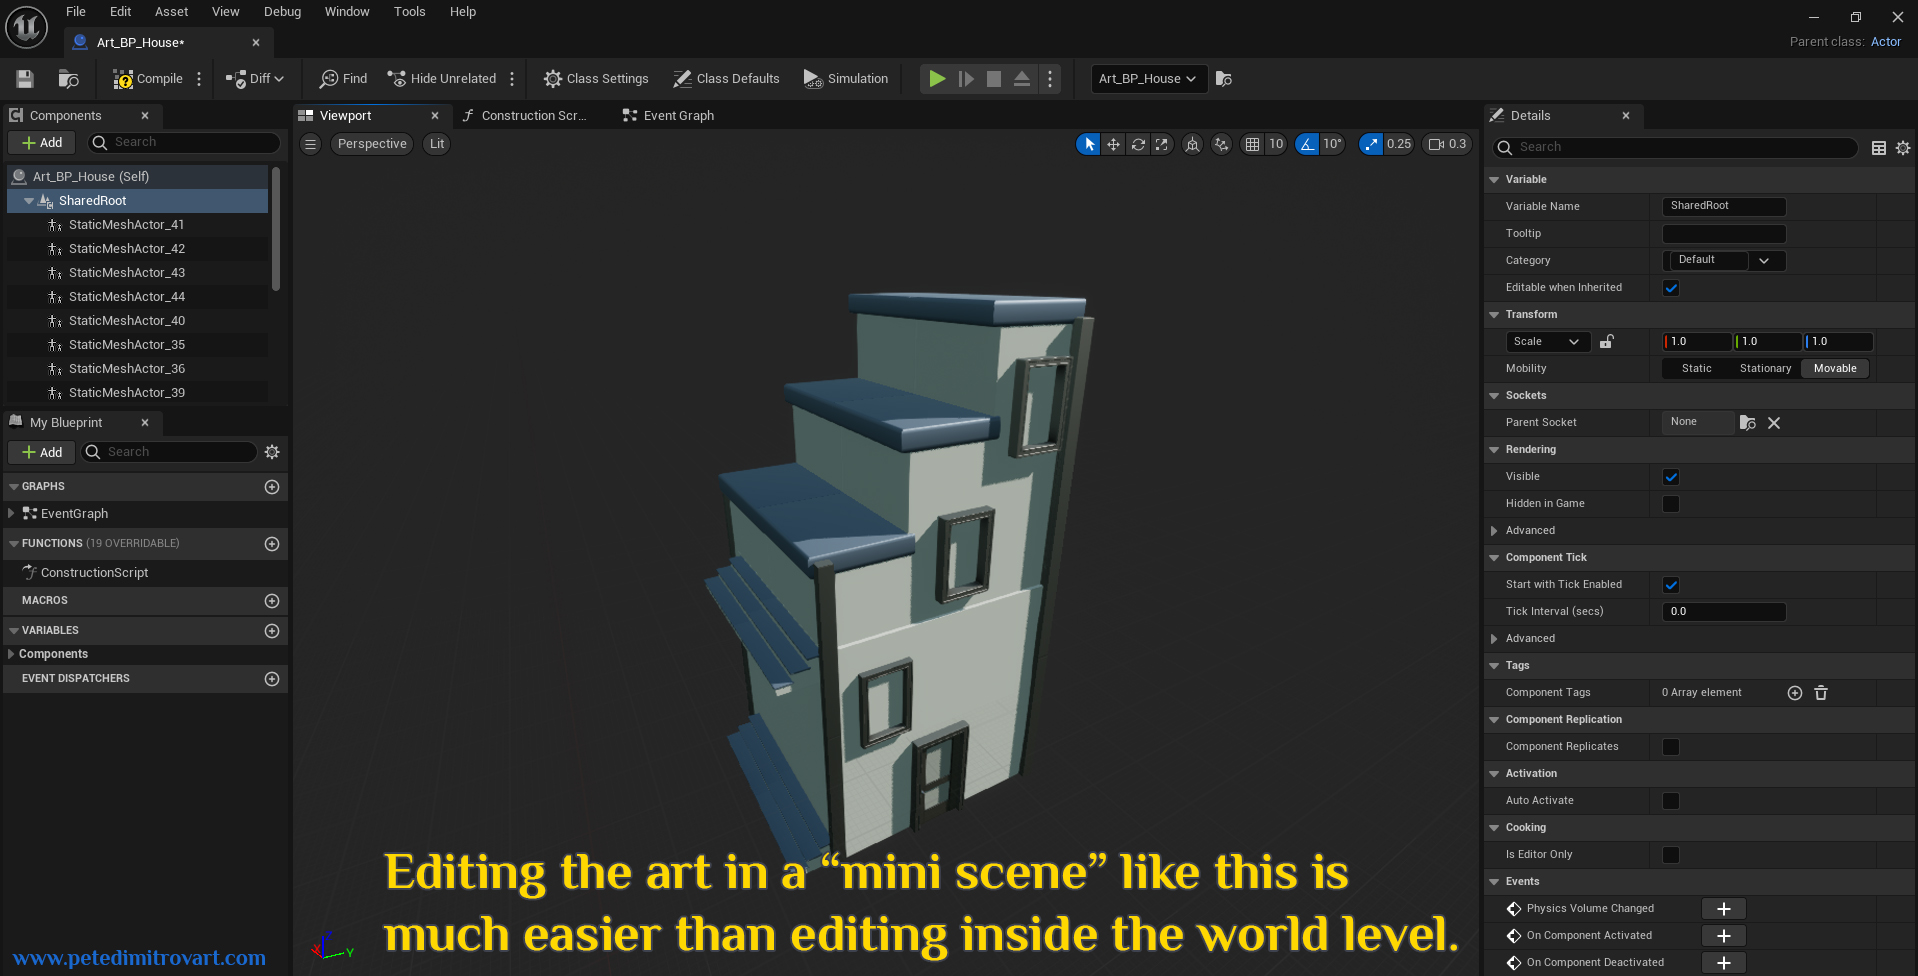 Screenshot from a Blueprint editing window in Unreal 5. It showcases the house and all its set dressings bundled together. Yellow text reads “Editing the art in a “mini scene” like this is much easier tha editing inside the world level.”.